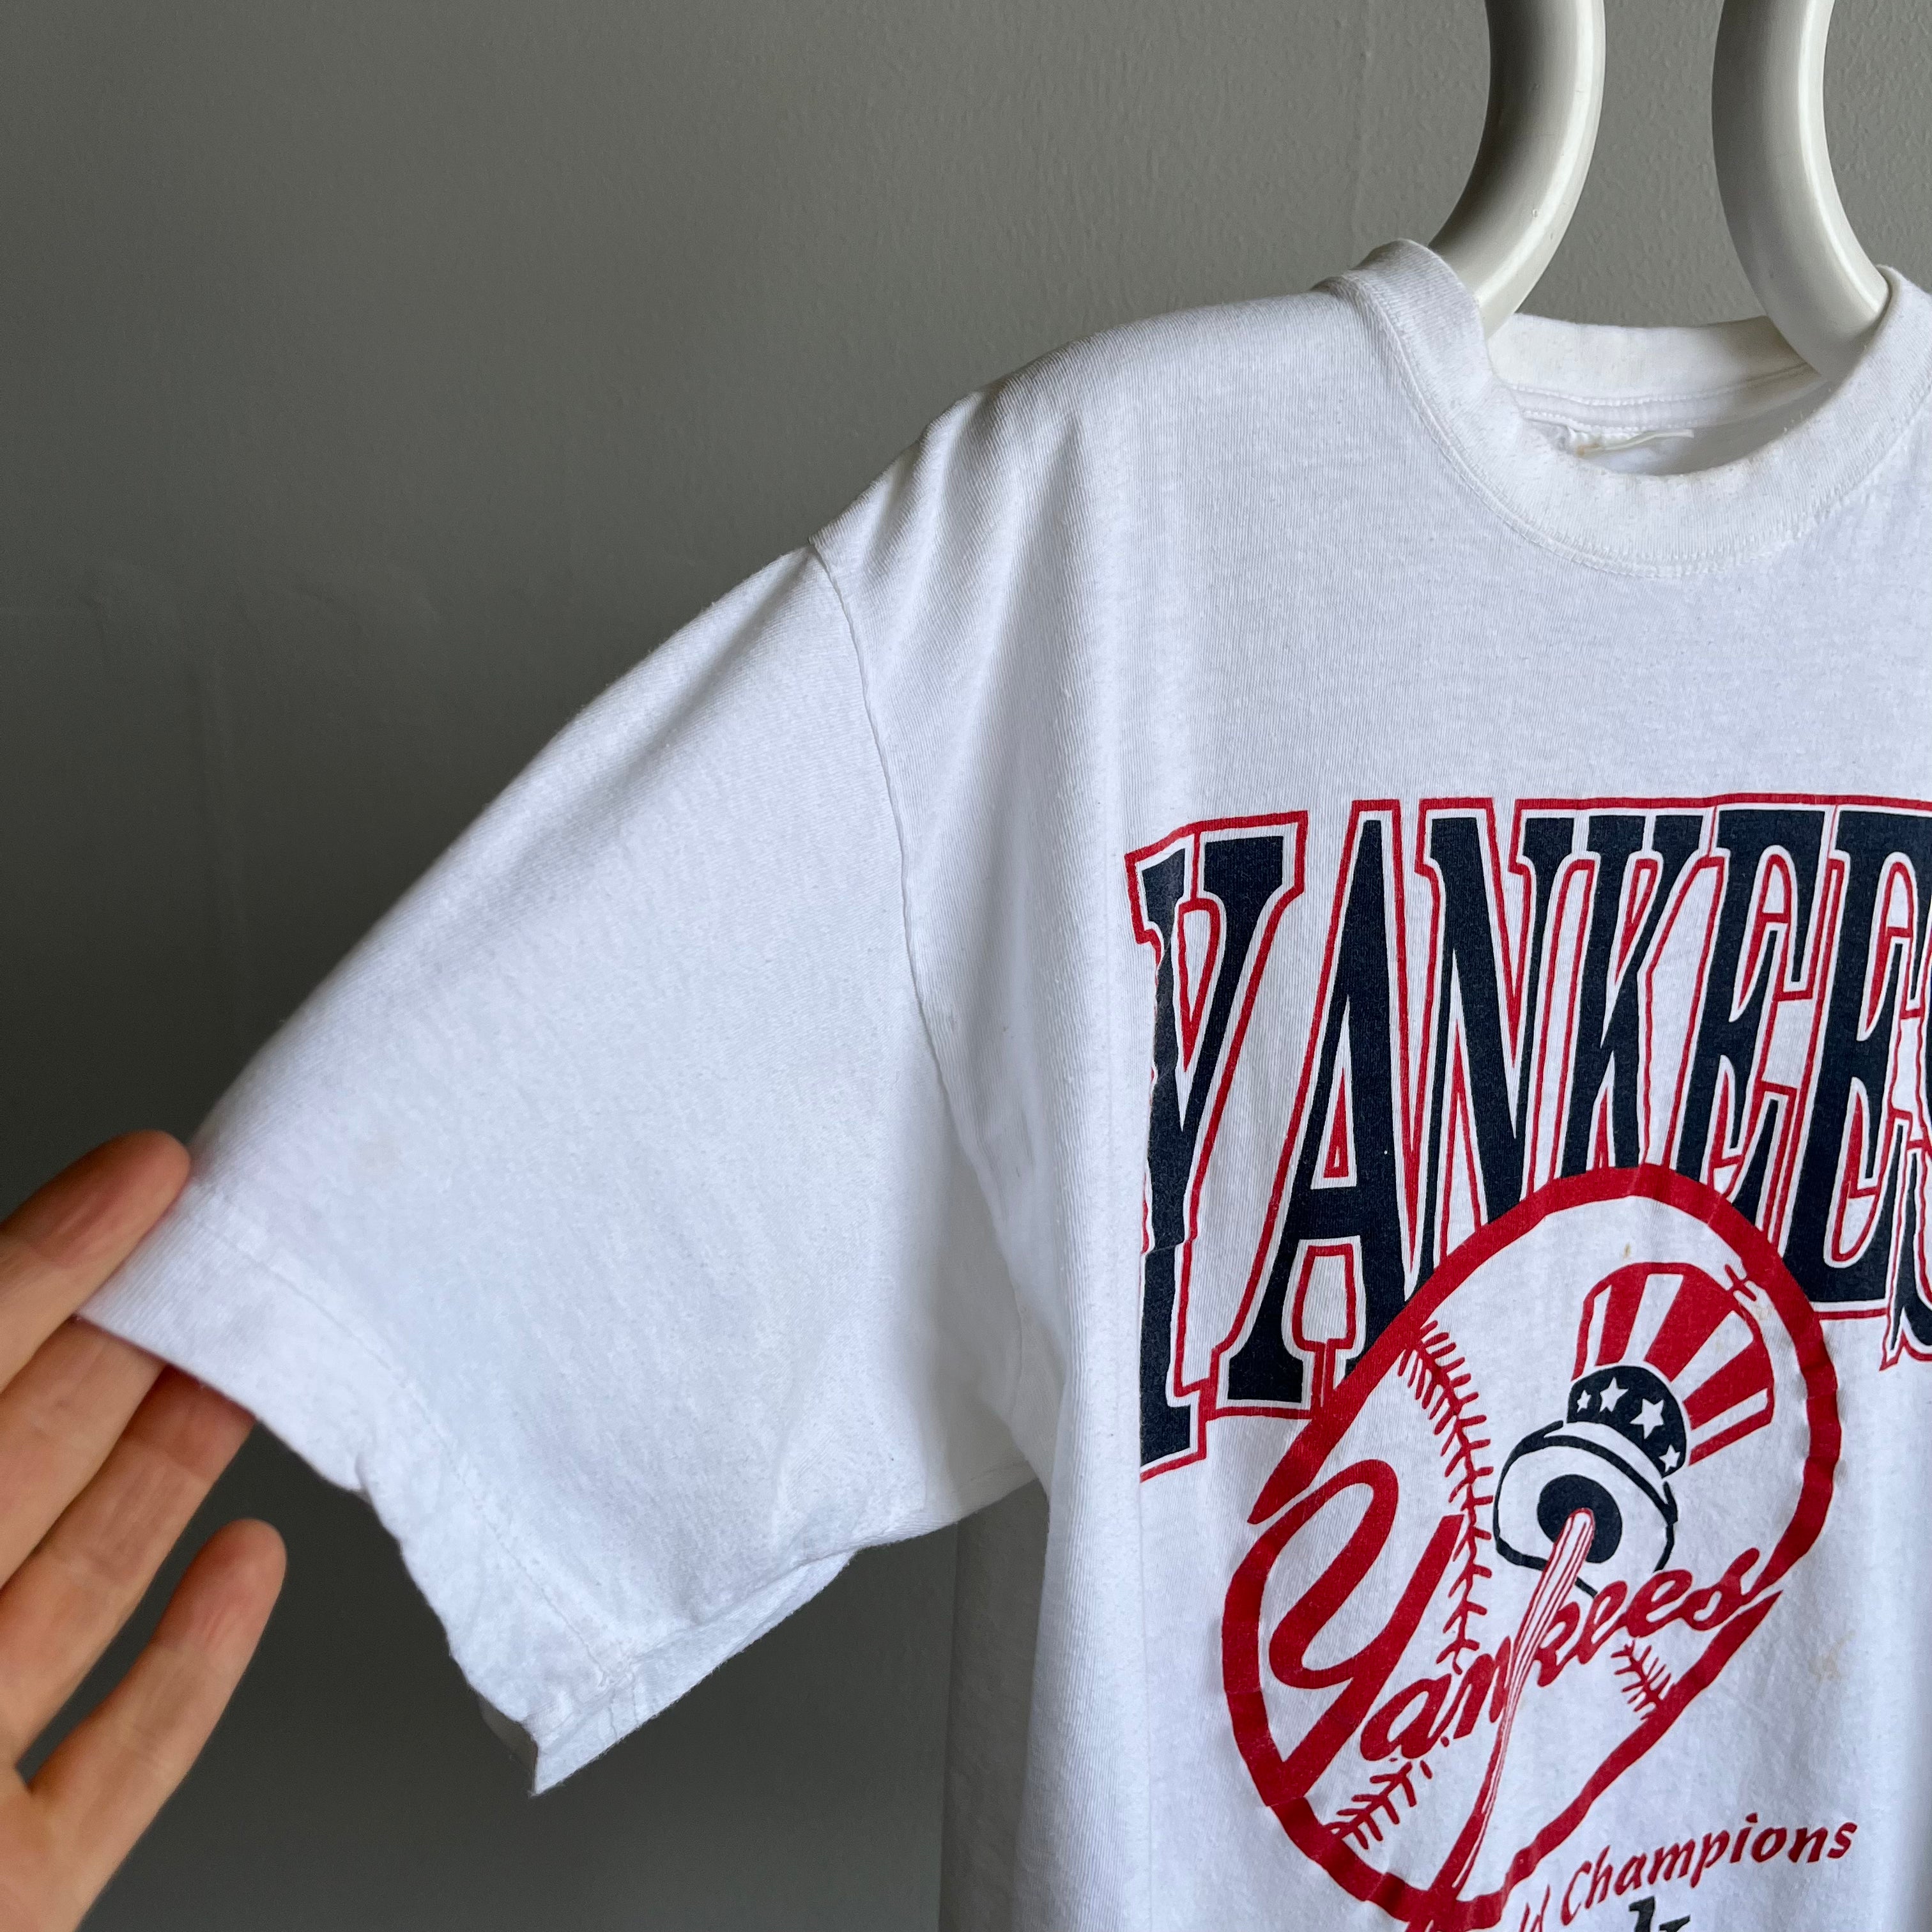 Vintage New York Yankees Shirt Adult Small Blue White Gray The